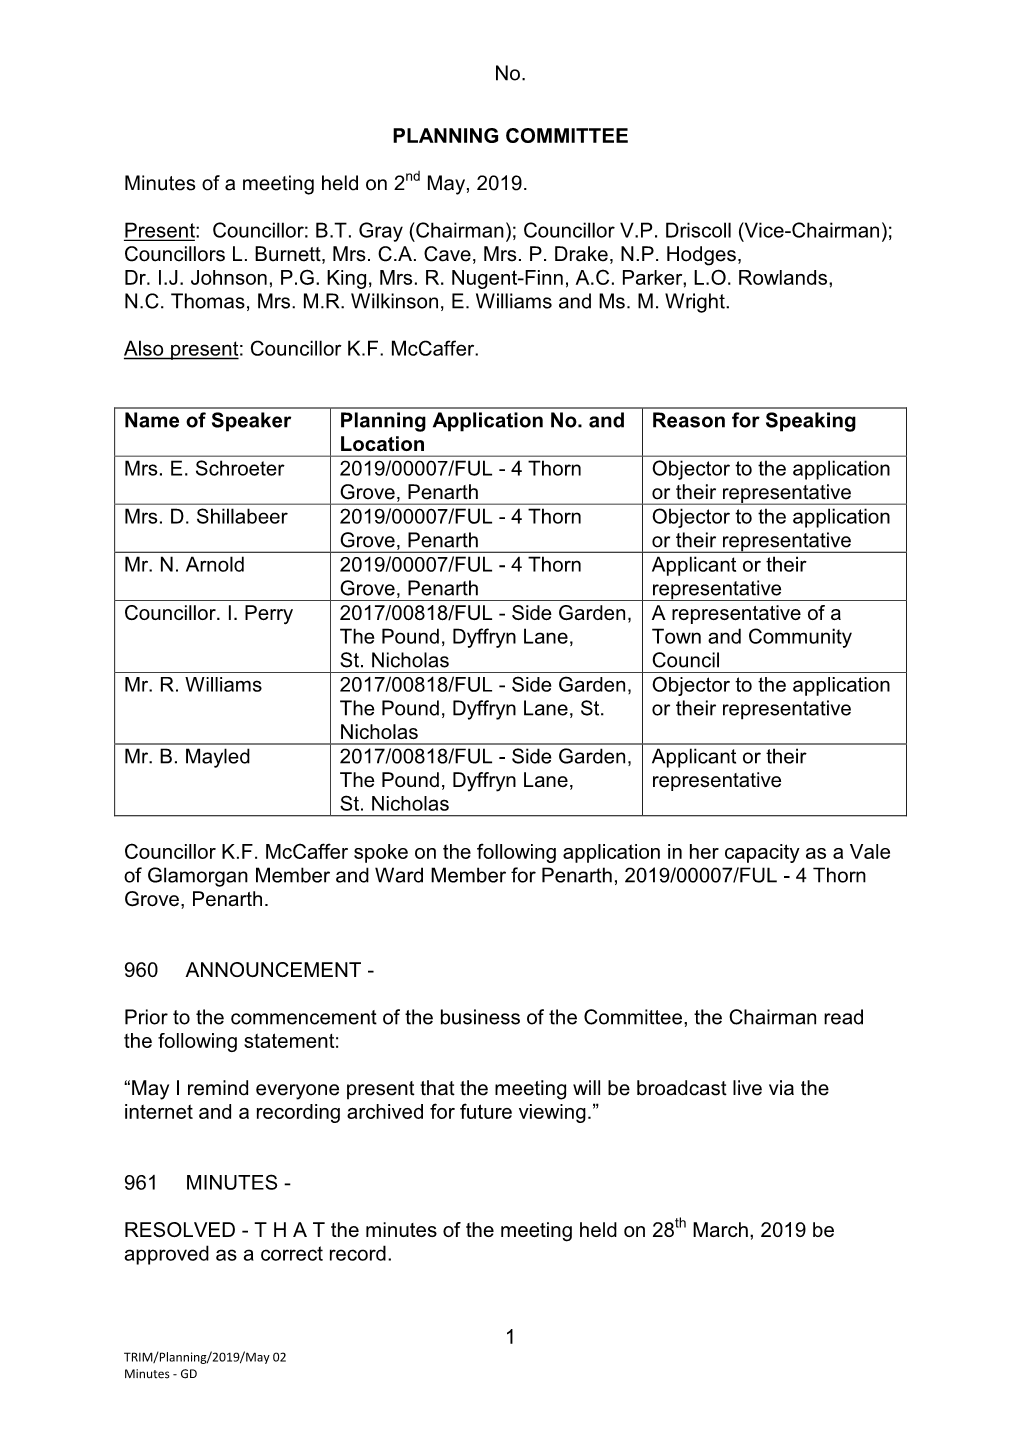 No. 1 PLANNING COMMITTEE Minutes of a Meeting Held on 2 May